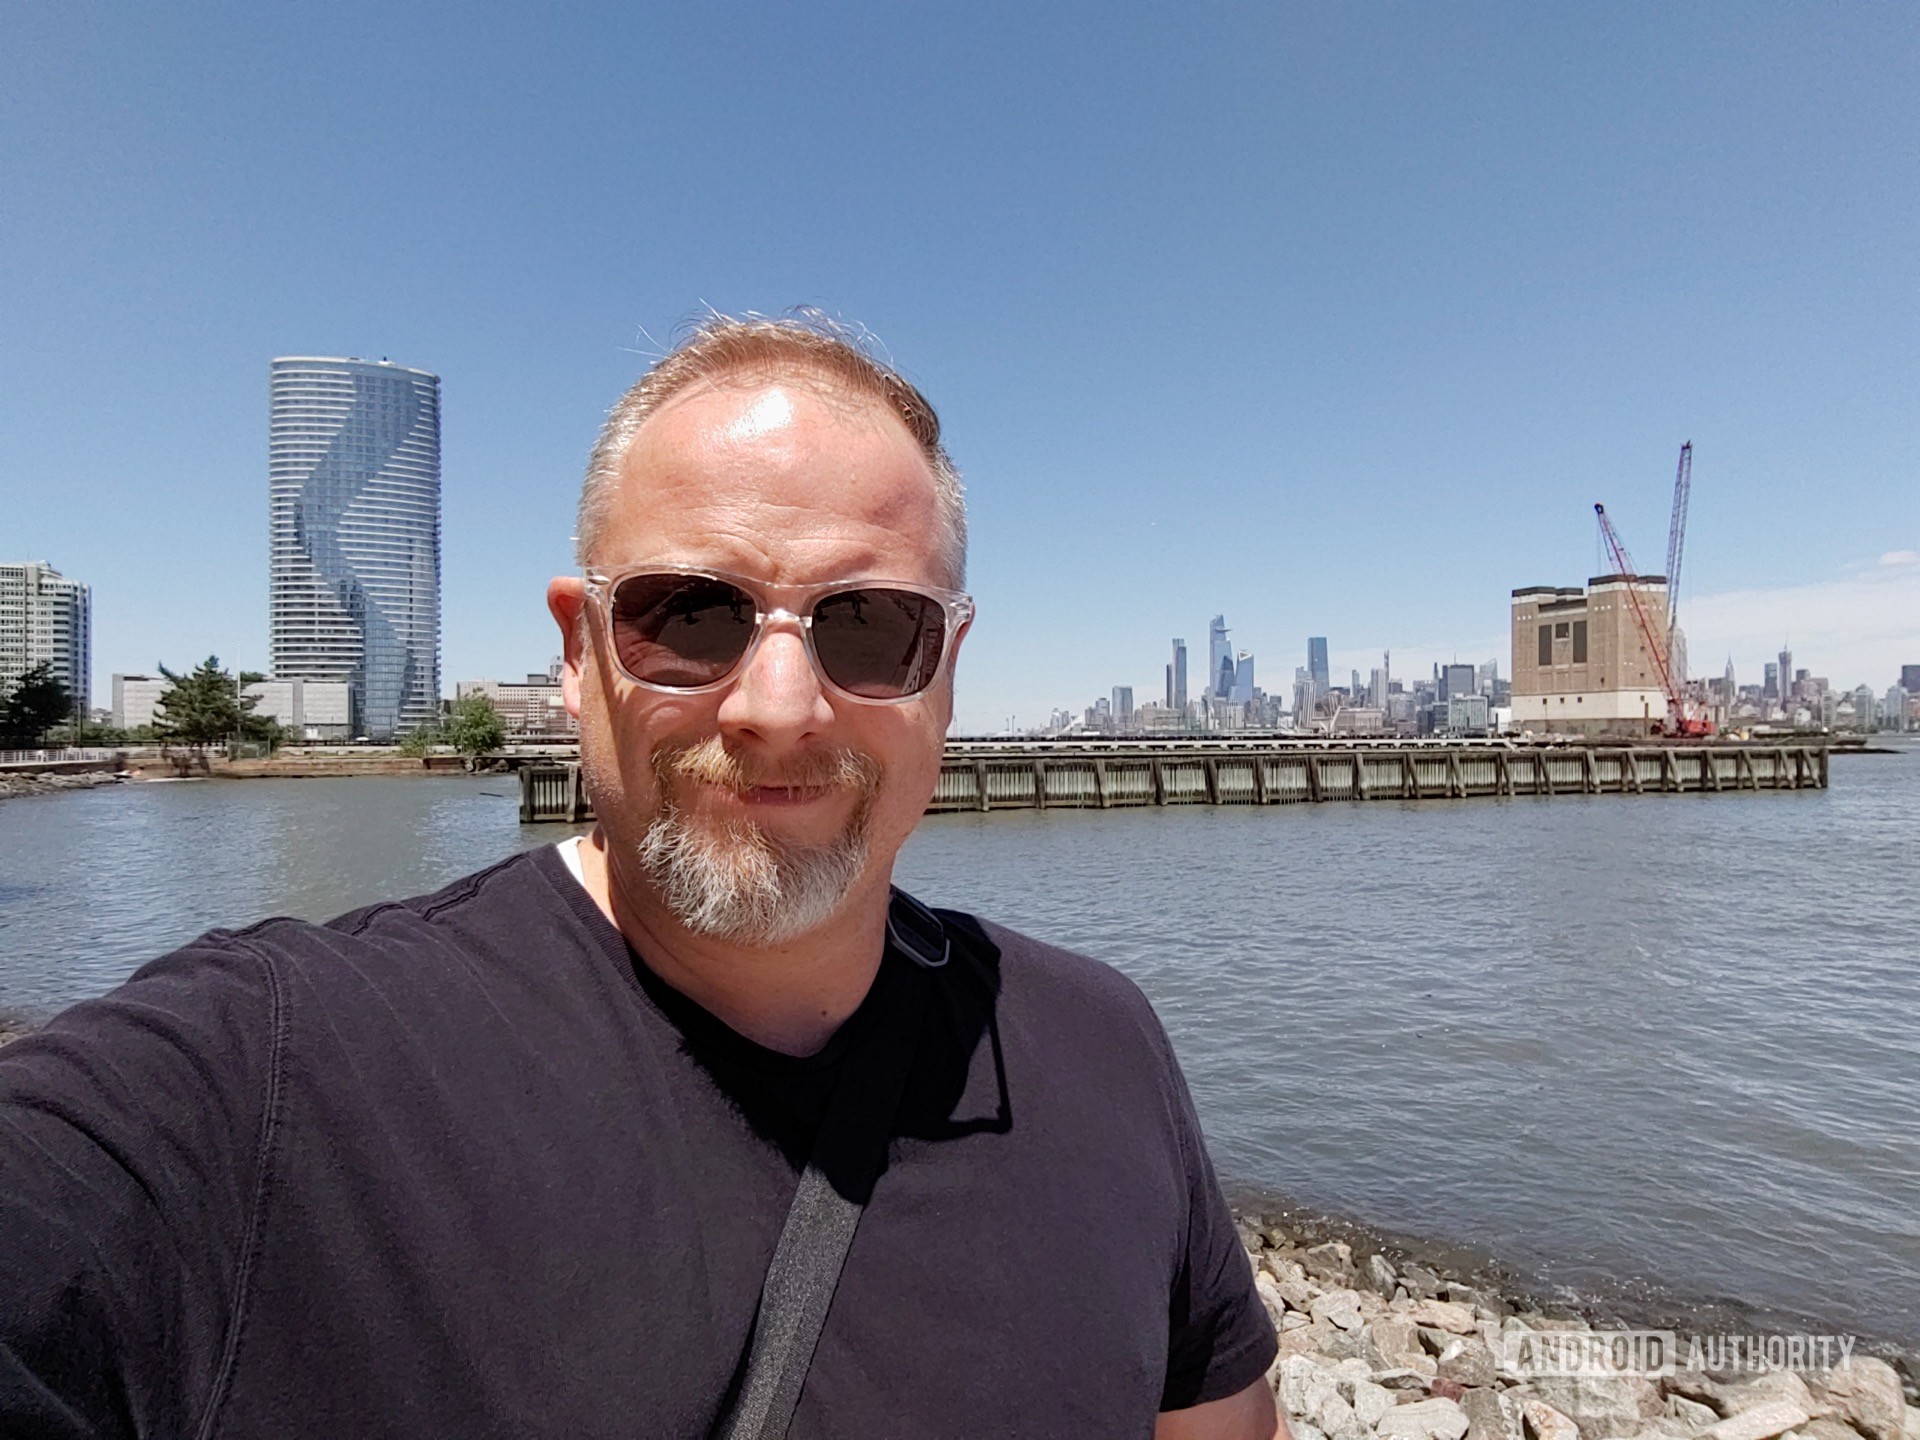 LG V50 ThinQ Review sample photo wide angle selfie